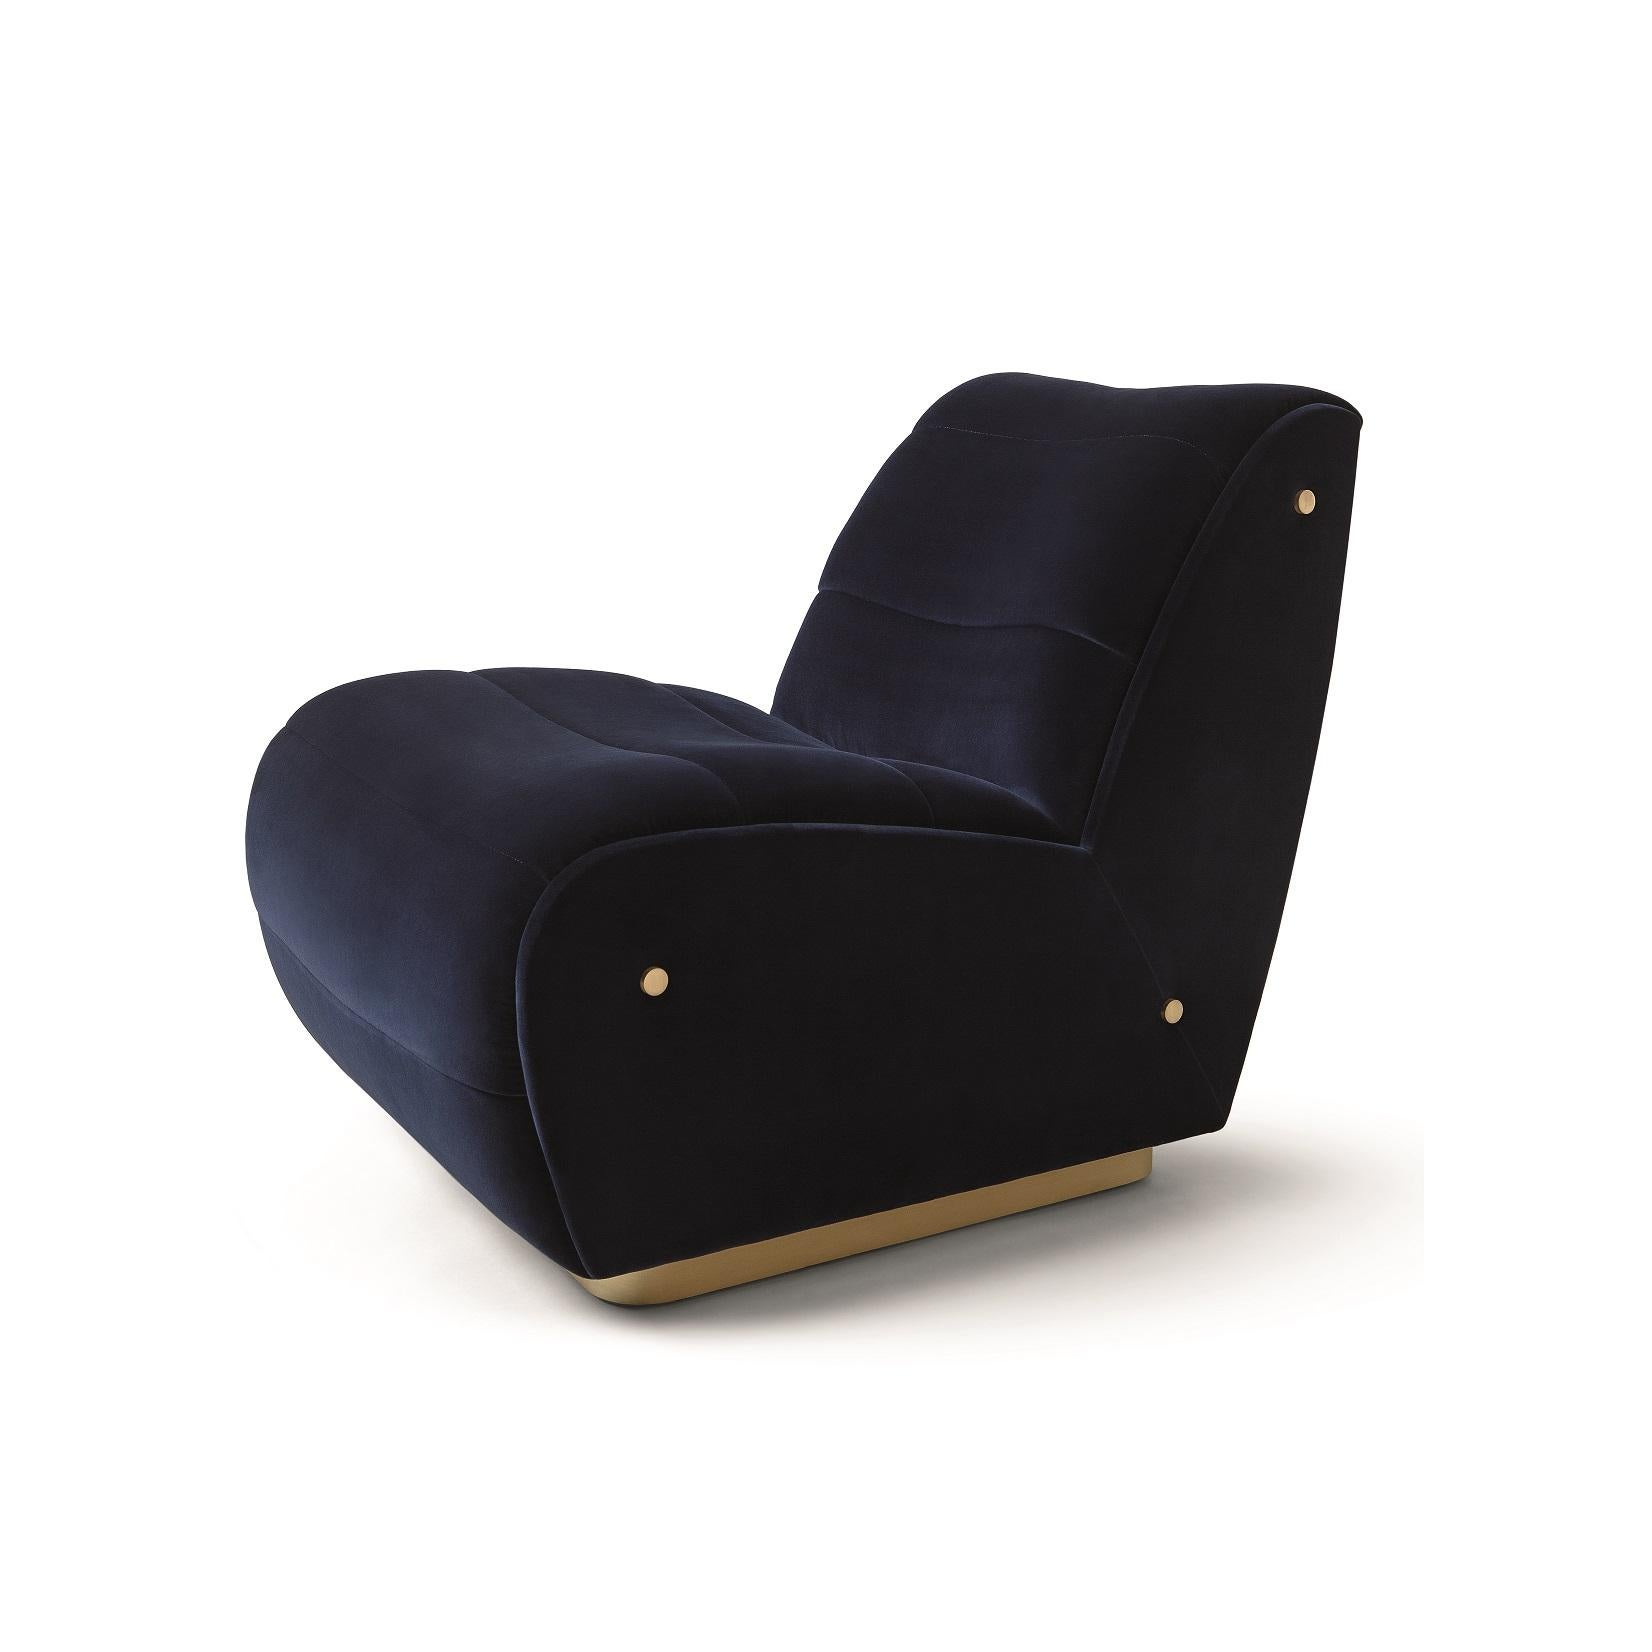 this armchair is an elevated homage to the golden age of gentleman drivers. The piece’s flawless structure is deceivingly simple, yet undeniably striking. The detailed upholstery and seaming bears the mark of true craftsmanship. Its sensuous lines